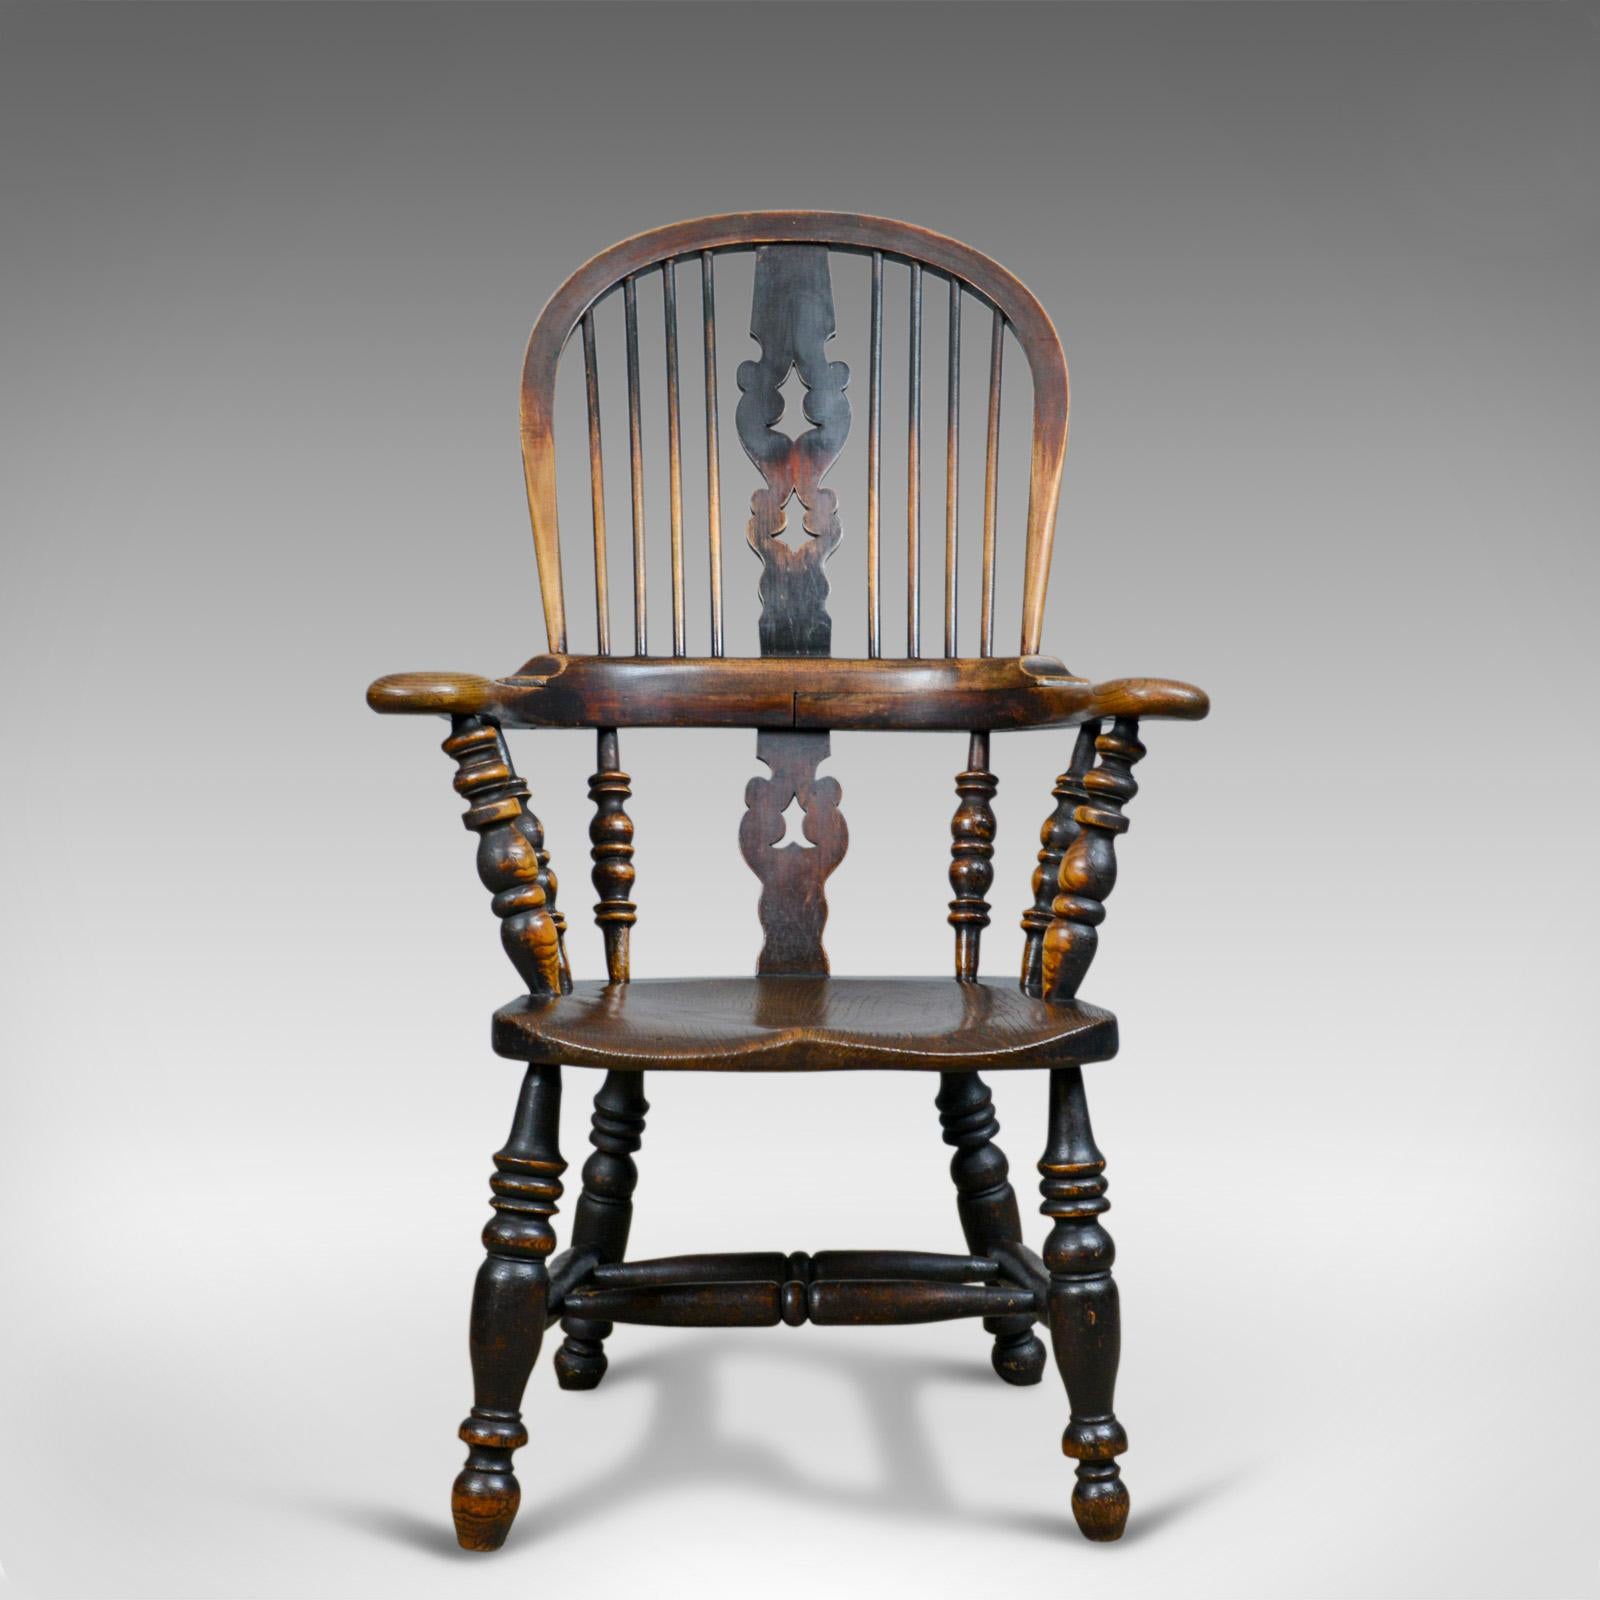 This is an antique Windsor broad arm elbow chair. An English, Yorkshire, Victorian, elm and ash armchair dating to the mid-19th century, circa 1850.

Classic English, country, elbow chair
Delightful color with a desirable aged patina
Triple